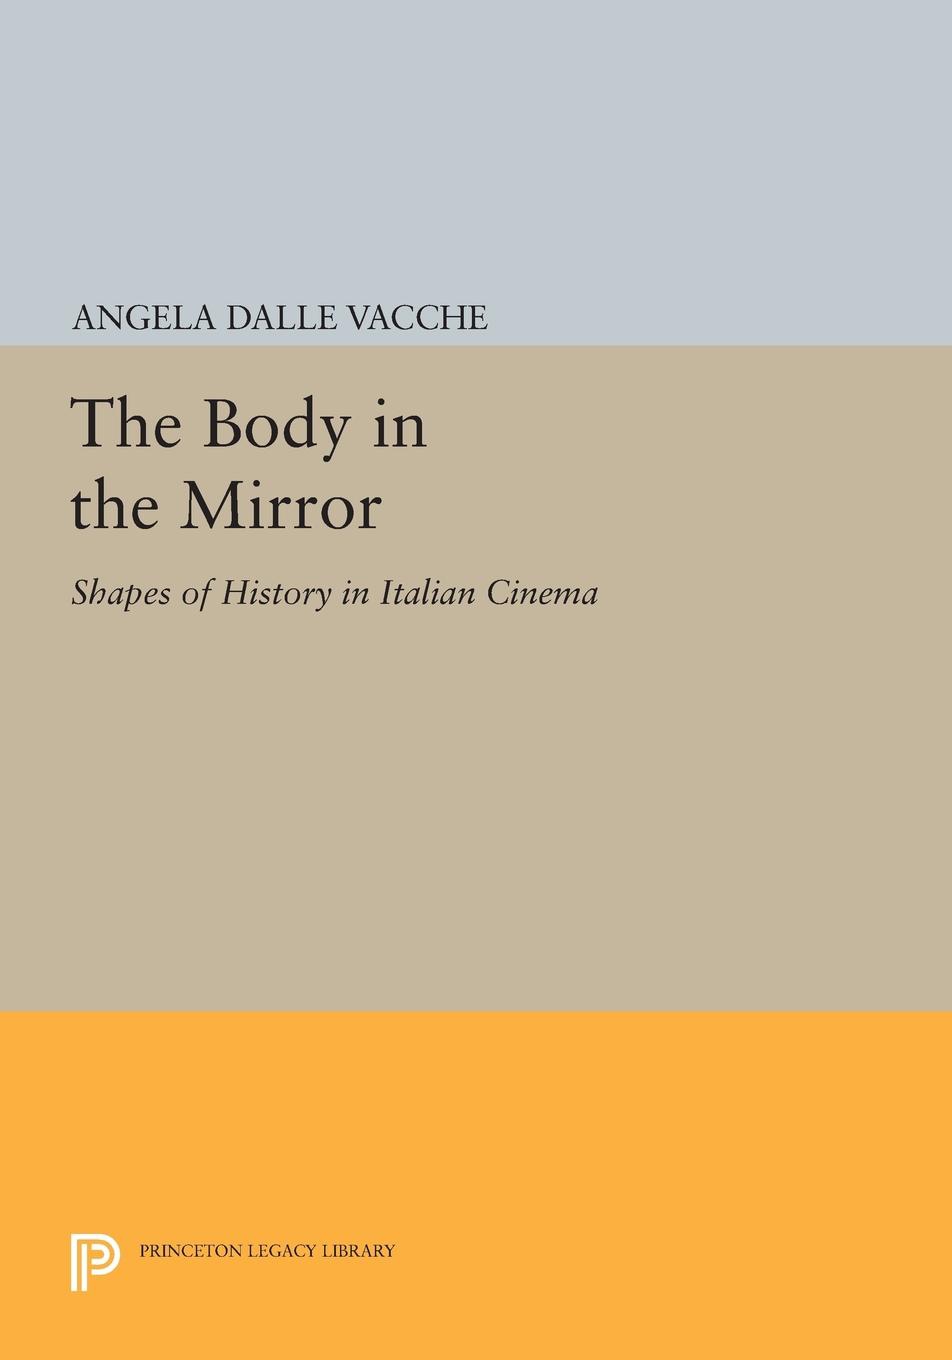 The body in the mirror